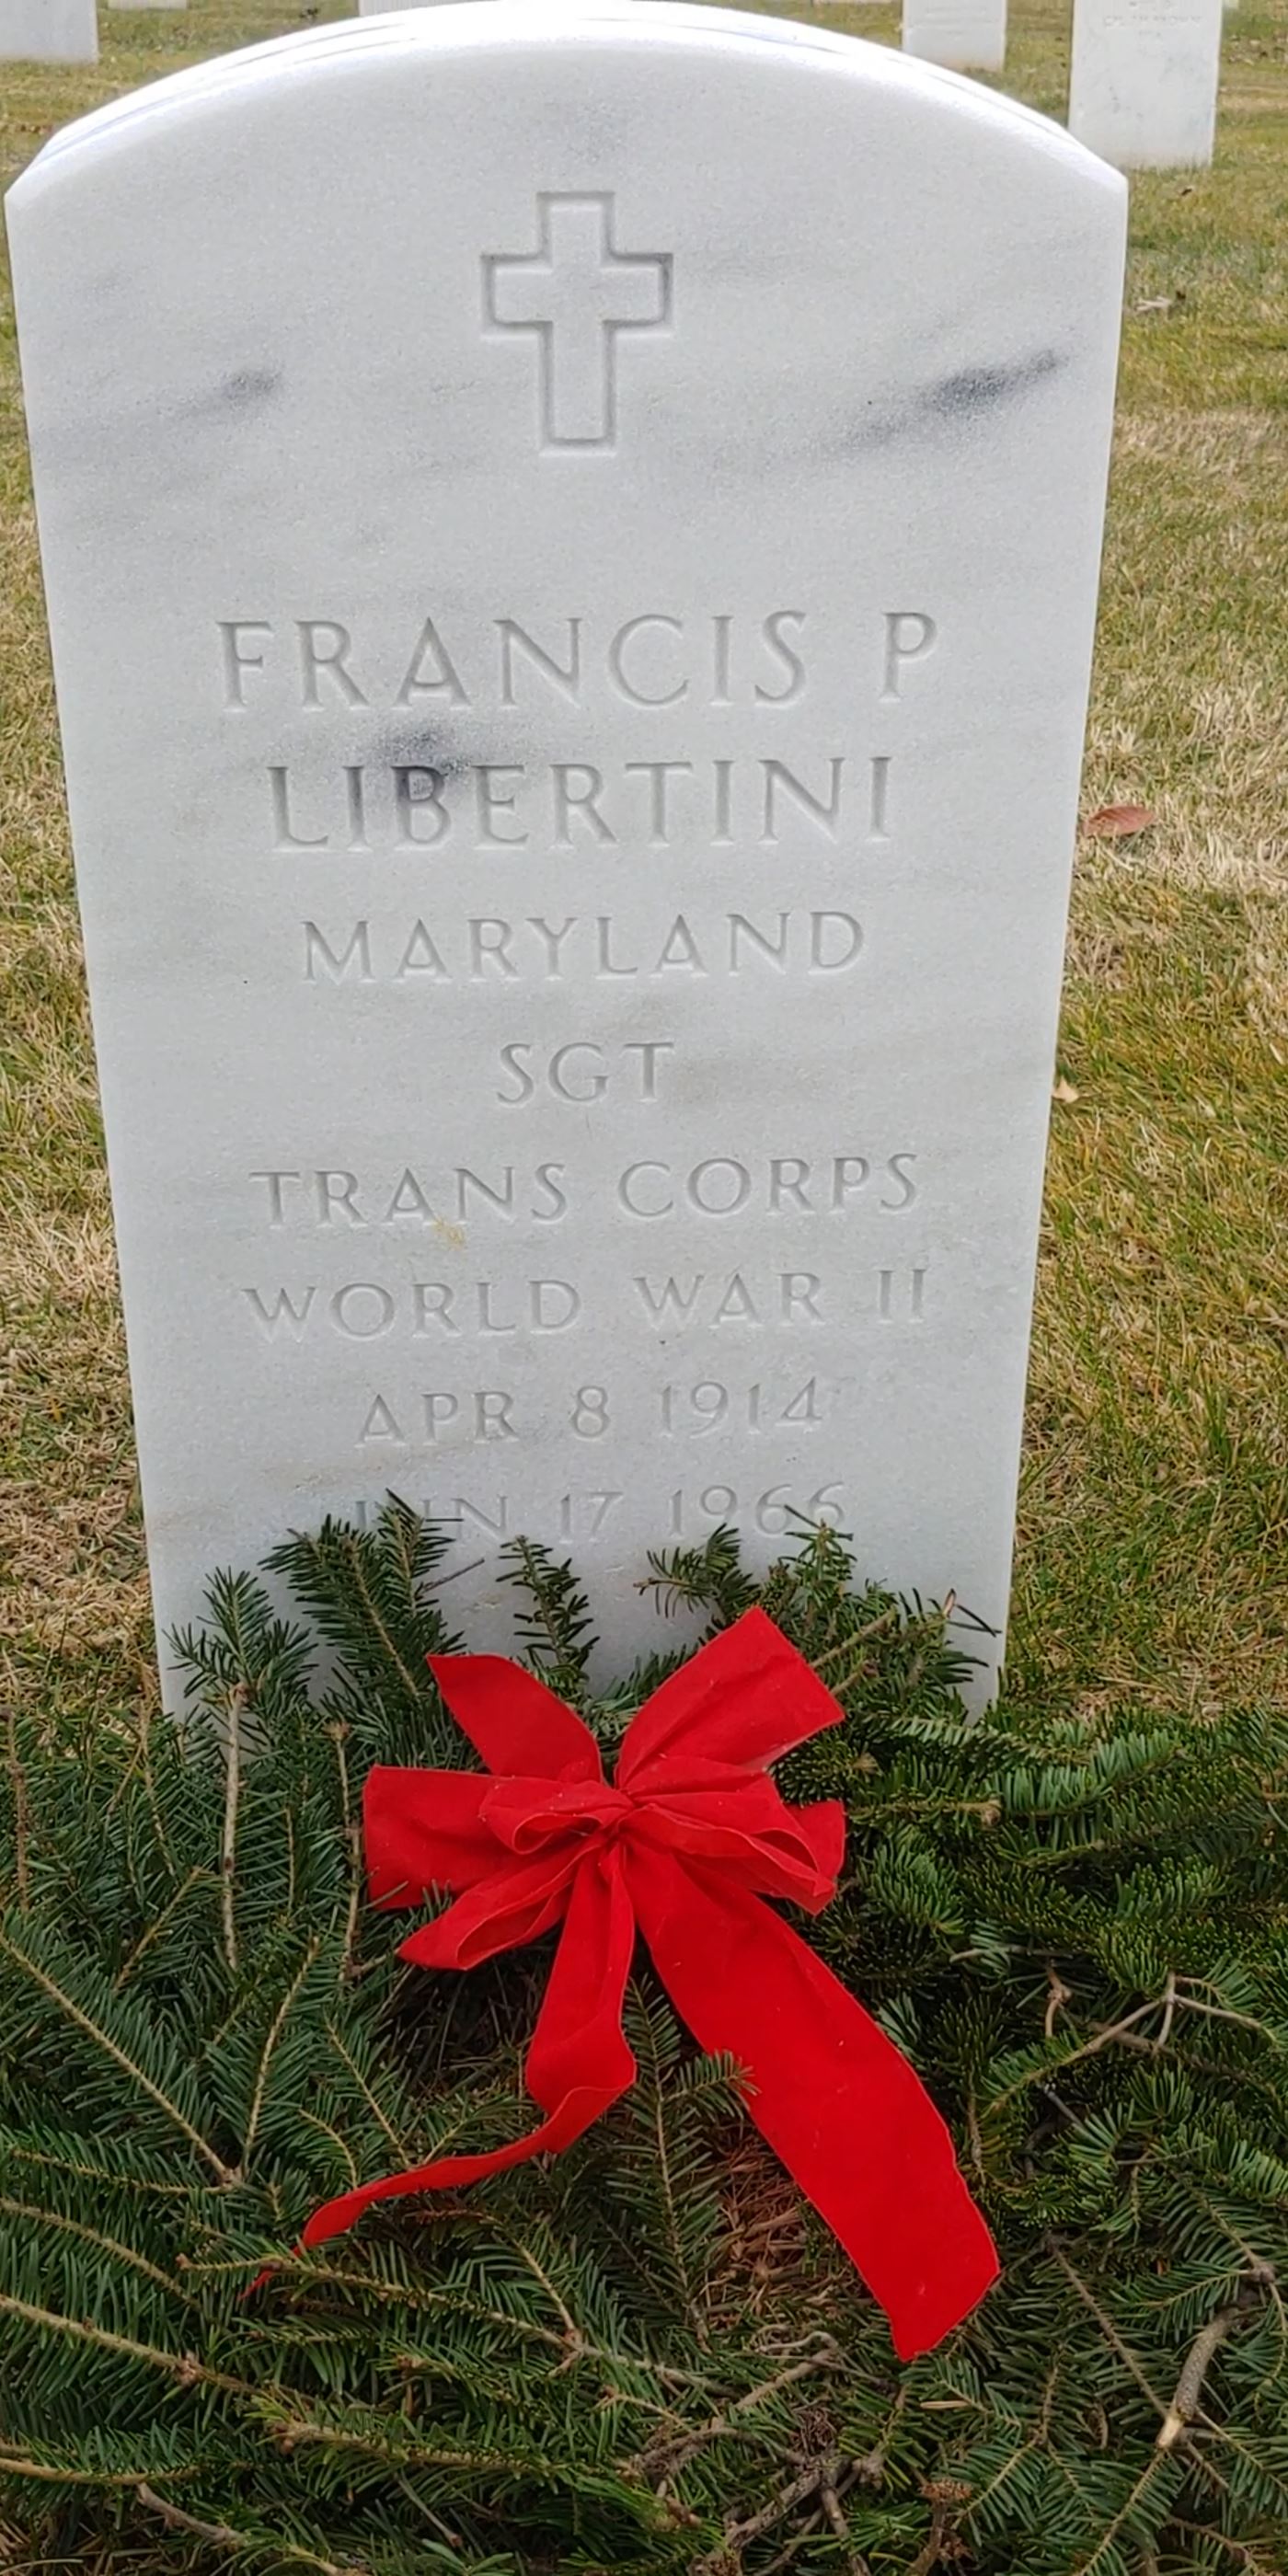 One of the wreaths laid at the cemetery Dec 18 2021